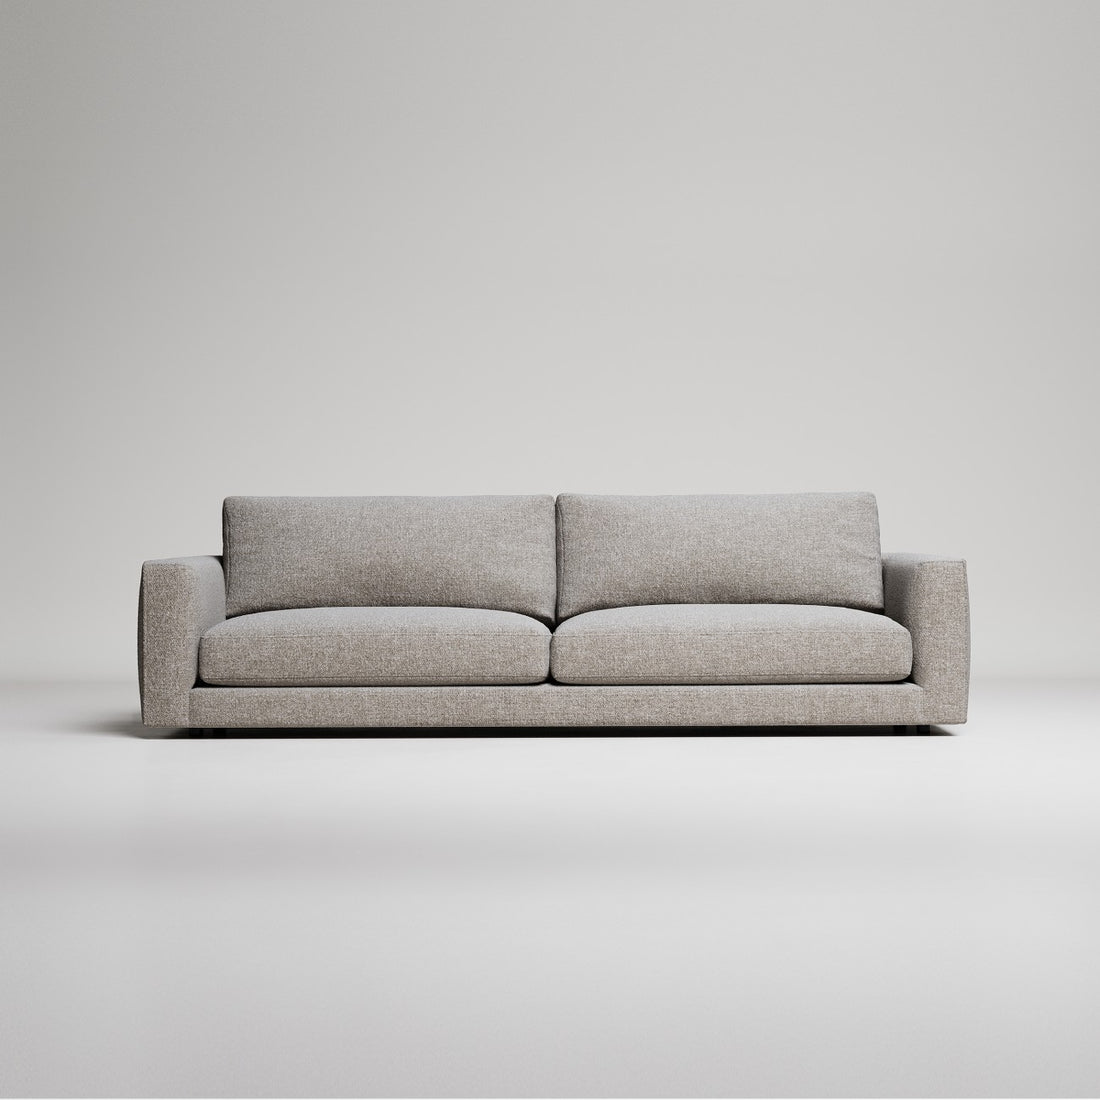 Experience luxury and style with the Palermo sofa by MOMU